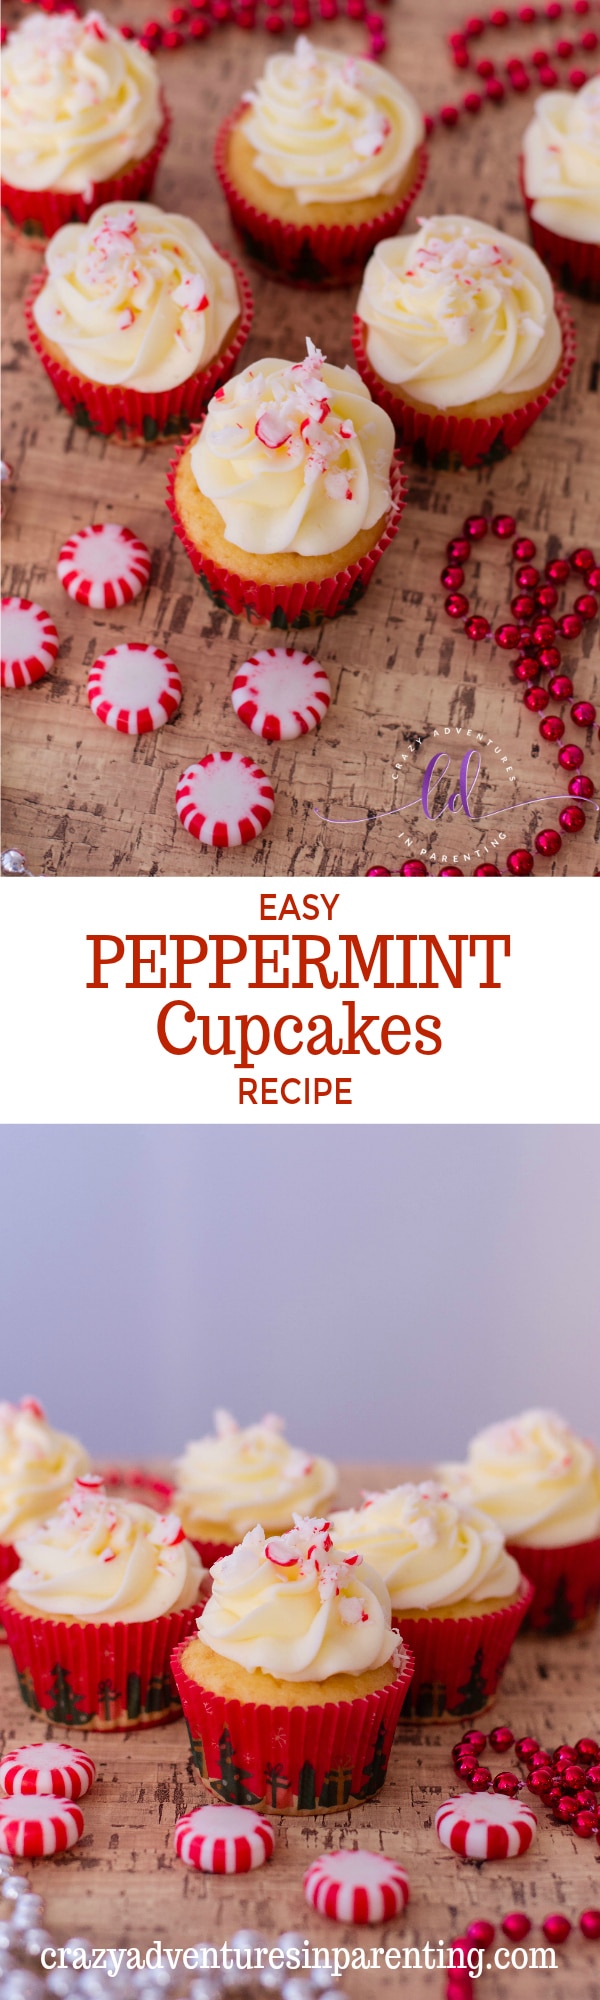 Easy Peppermint Cupcakes Recipe